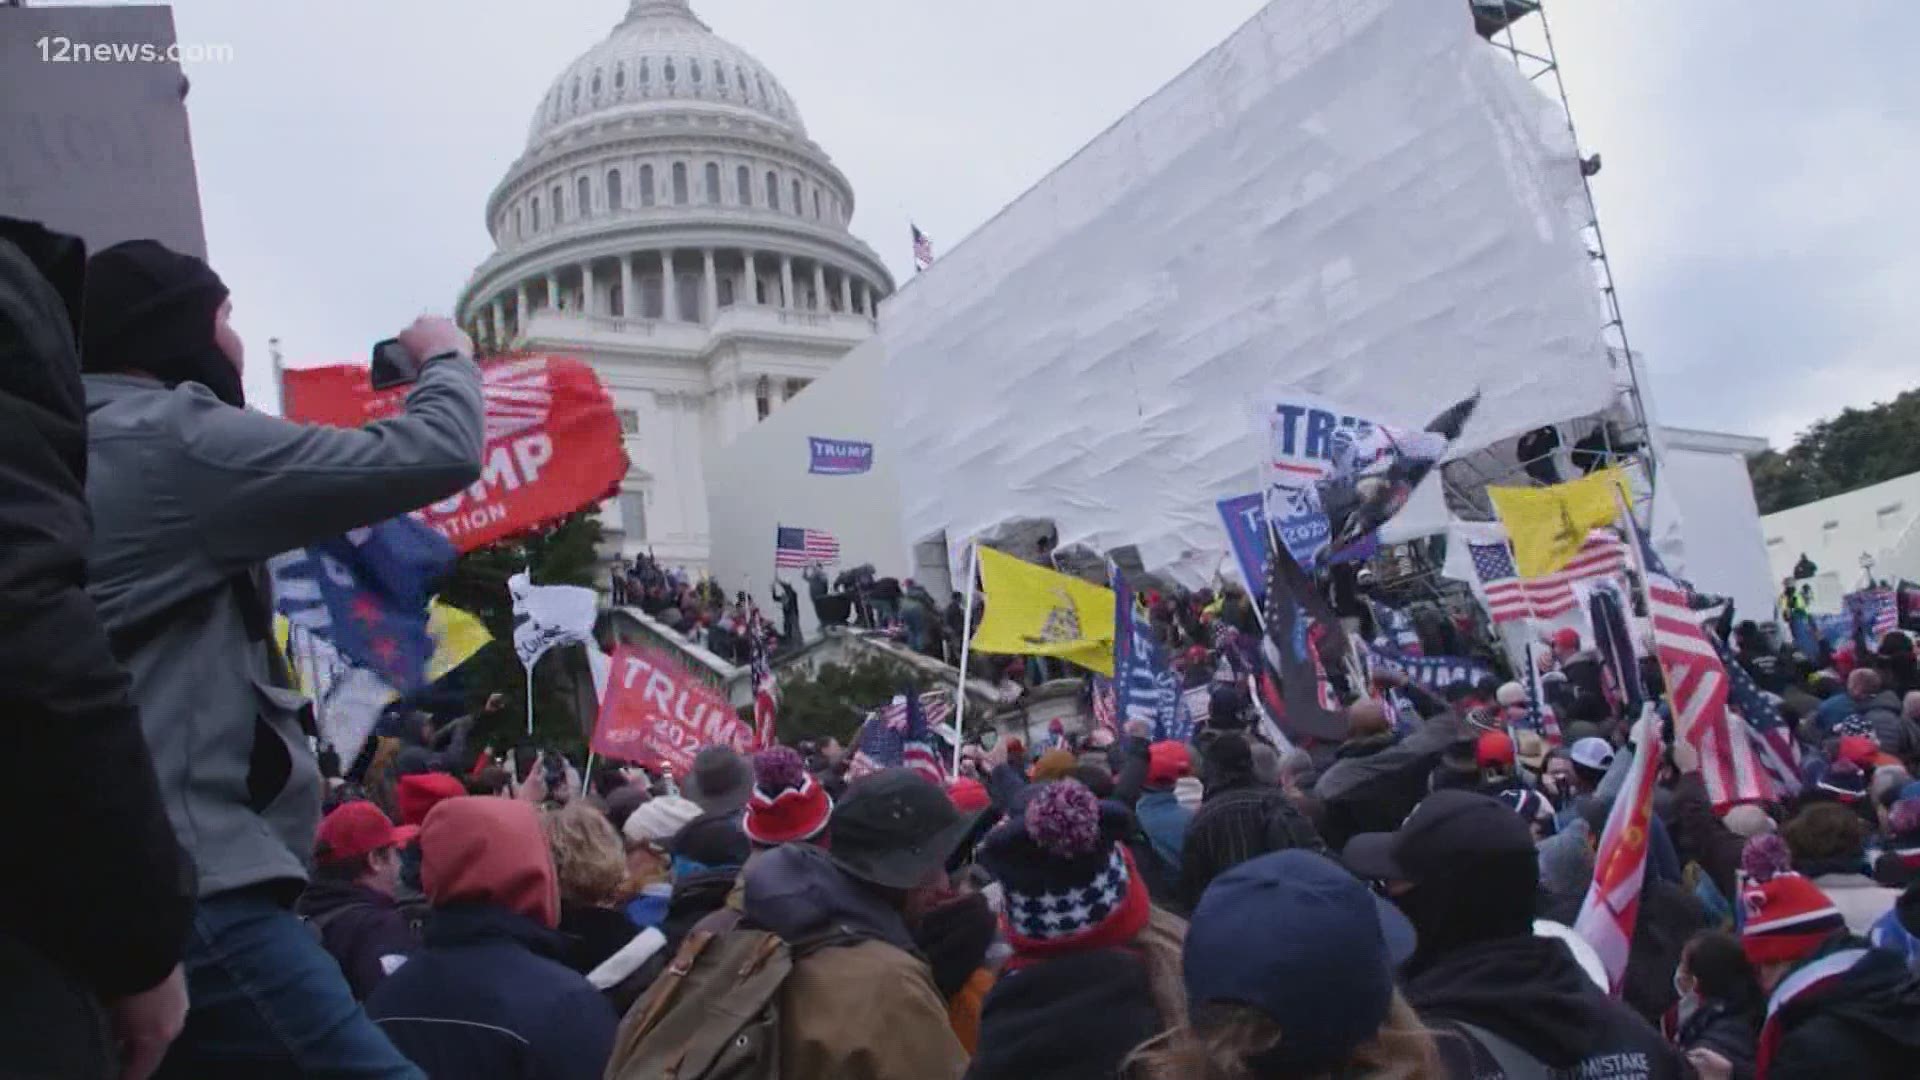 The riot inside the U.S. Capitol may have just been the tip of the iceberg as the FBI says more demonstrations are planned across the country.